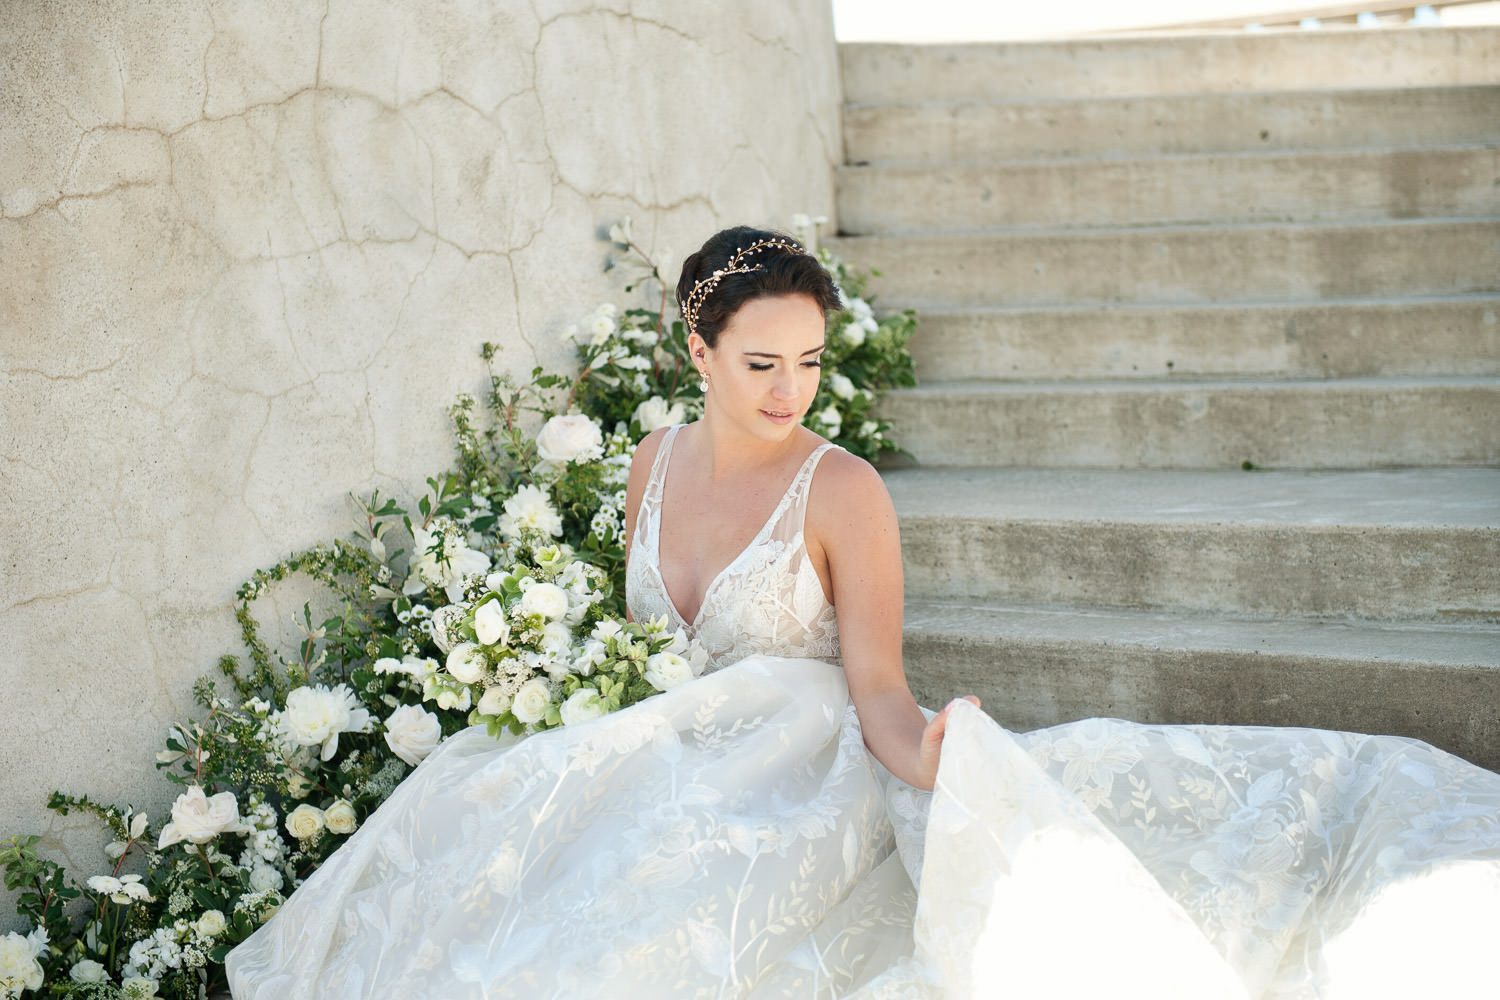 Bride on the Grand Staircase at Spruce Meadows captured by Tara Whittaker Photography